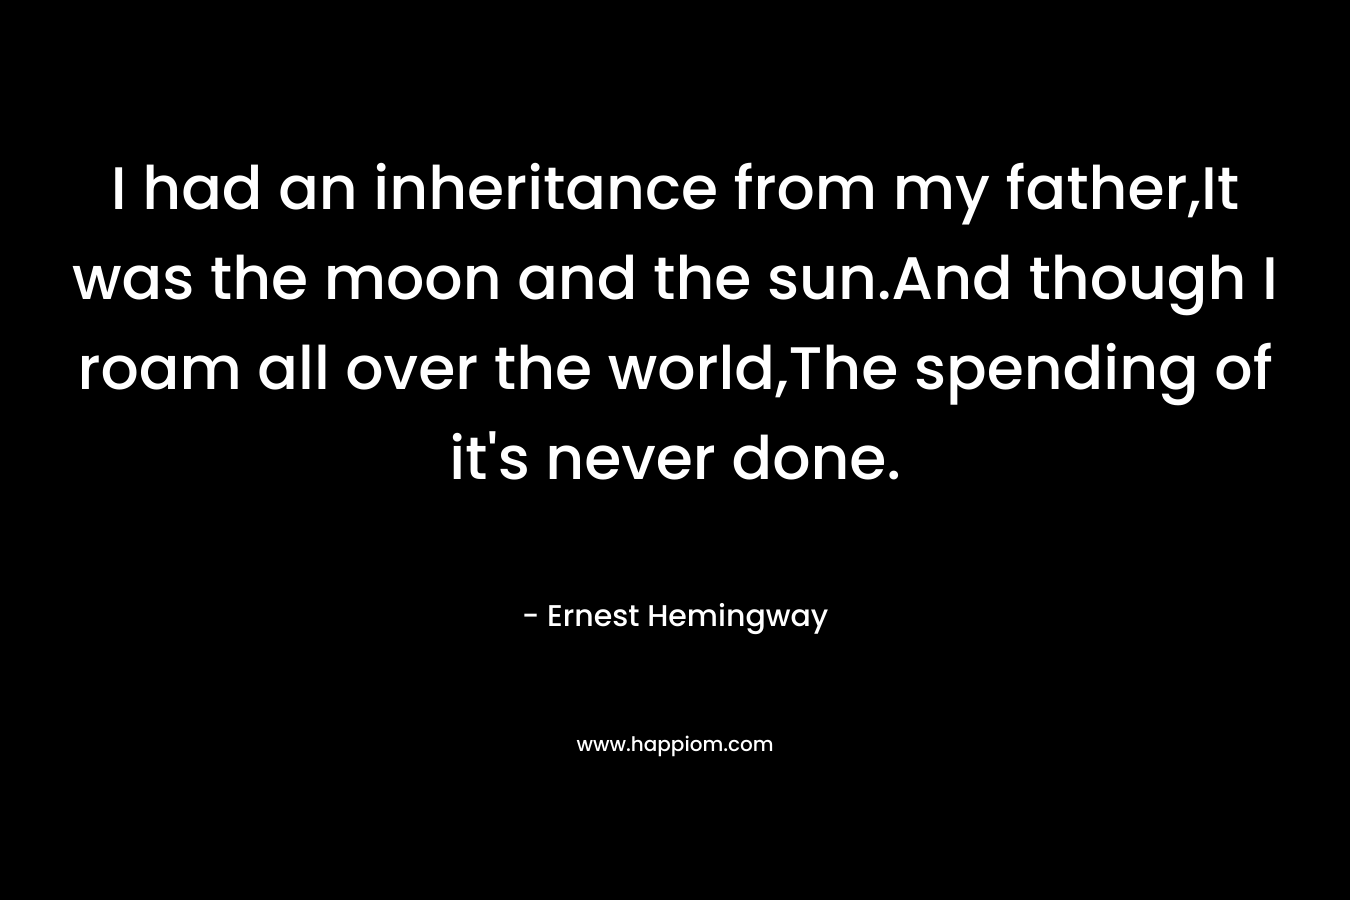 I had an inheritance from my father,It was the moon and the sun.And though I roam all over the world,The spending of it's never done.